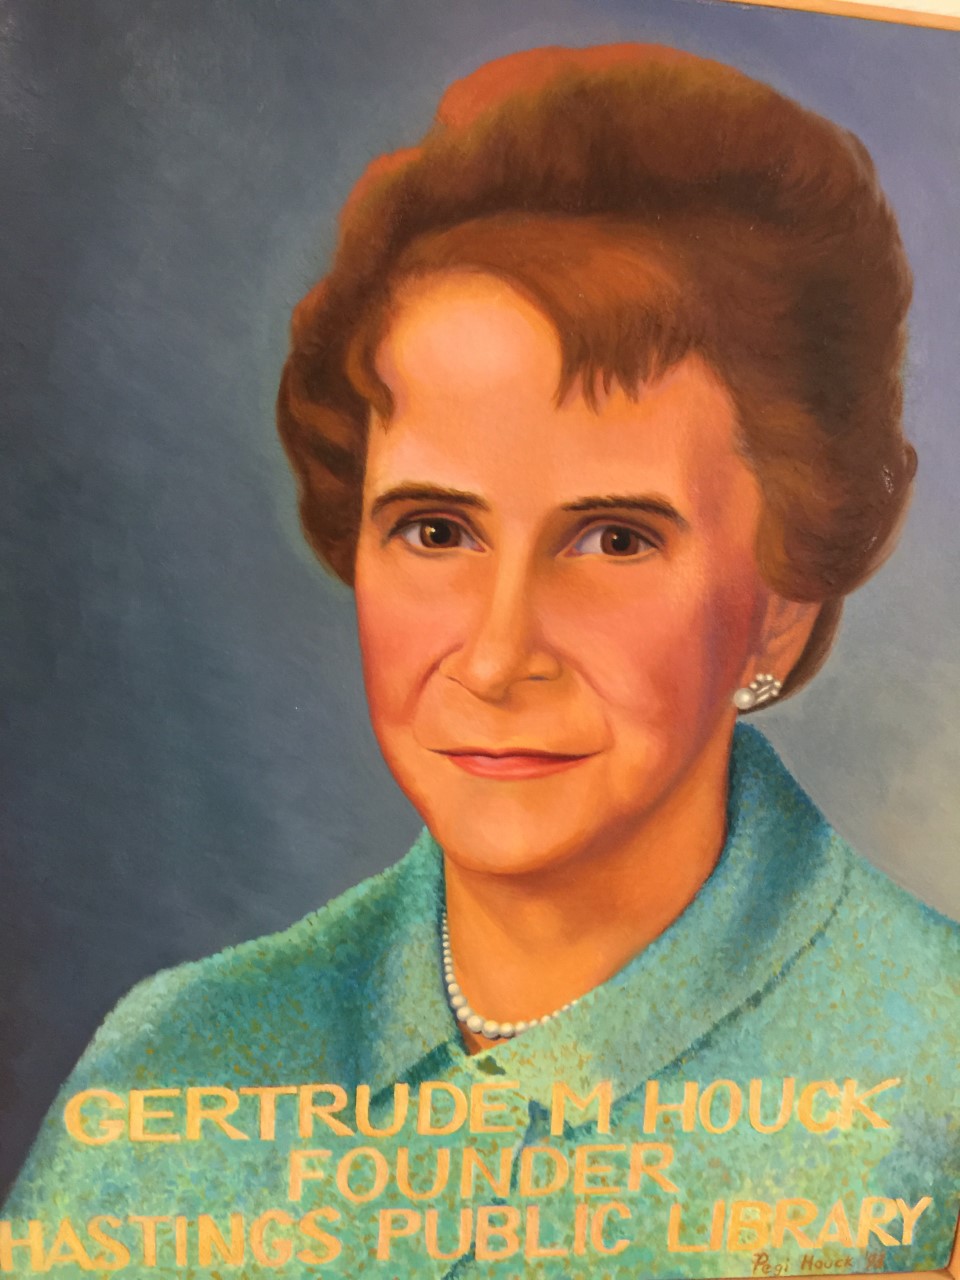 A painted portrait of Gertude Hauck, founder of Hastings Public Library